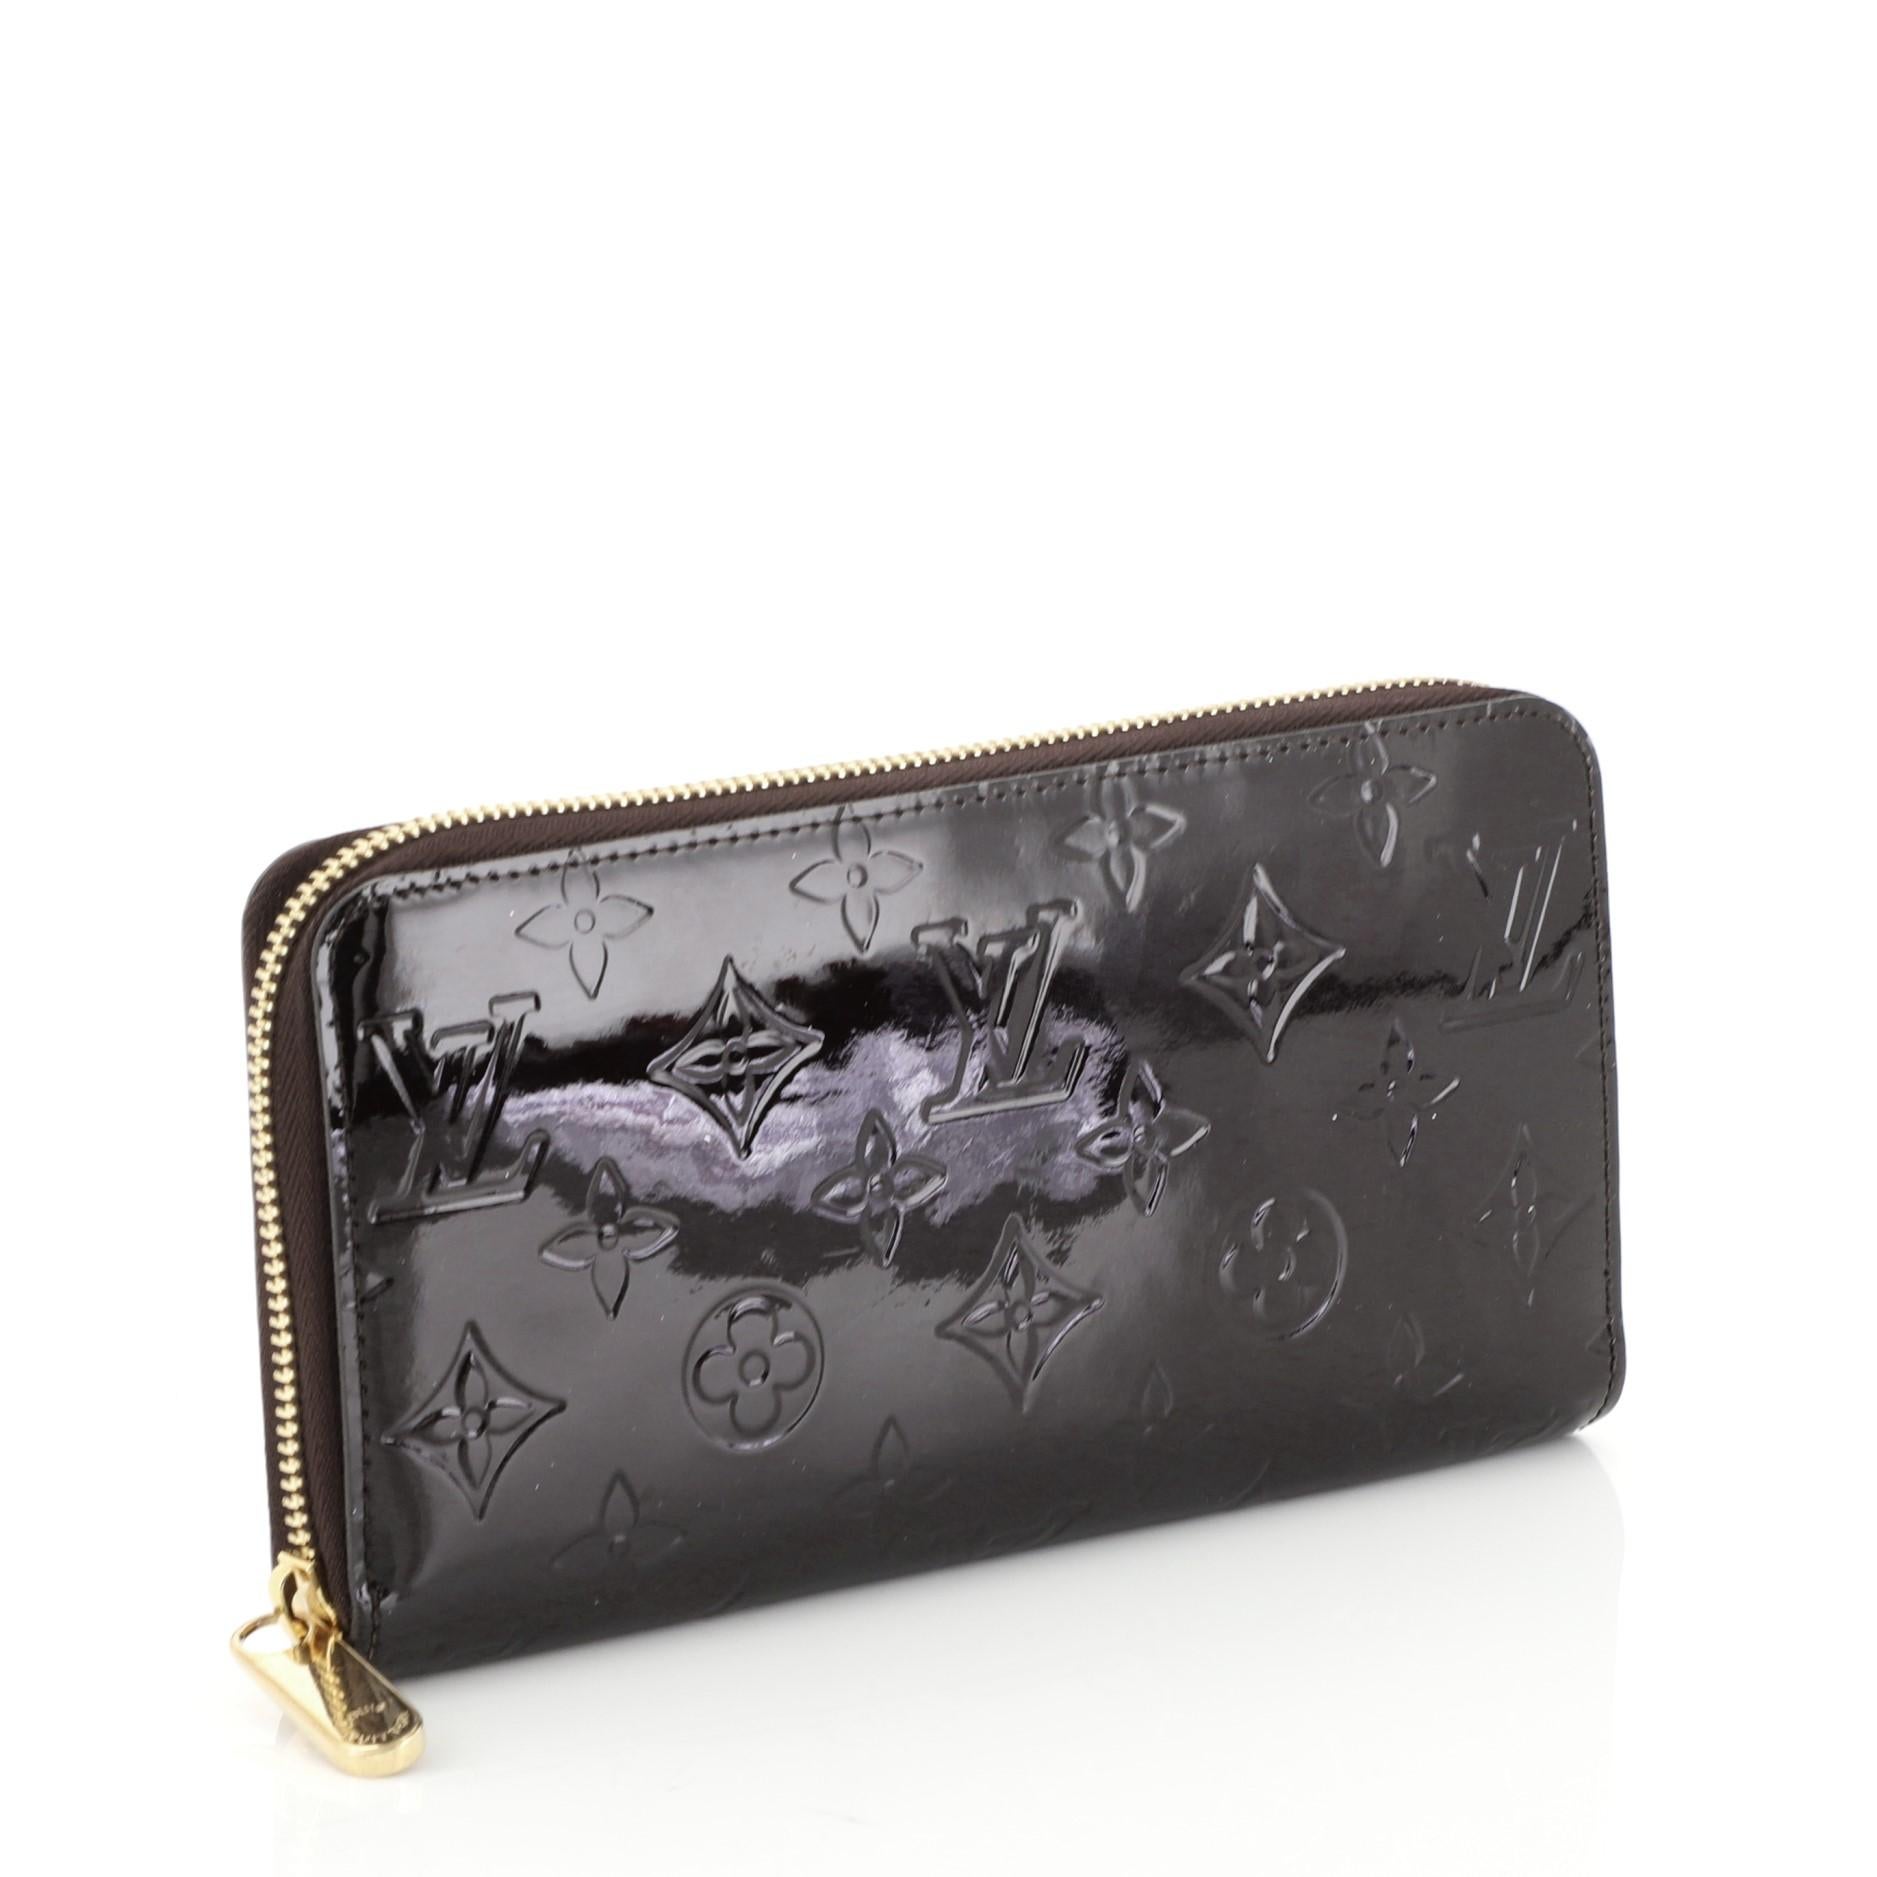 This Louis Vuitton Zippy Wallet Monogram Vernis, crafted in purple monogram vernis, features gold-tone hardware. Its all-around zip closure opens to a purple leather interior with a middle zip compartment, slip pocket, and multiple card slots.